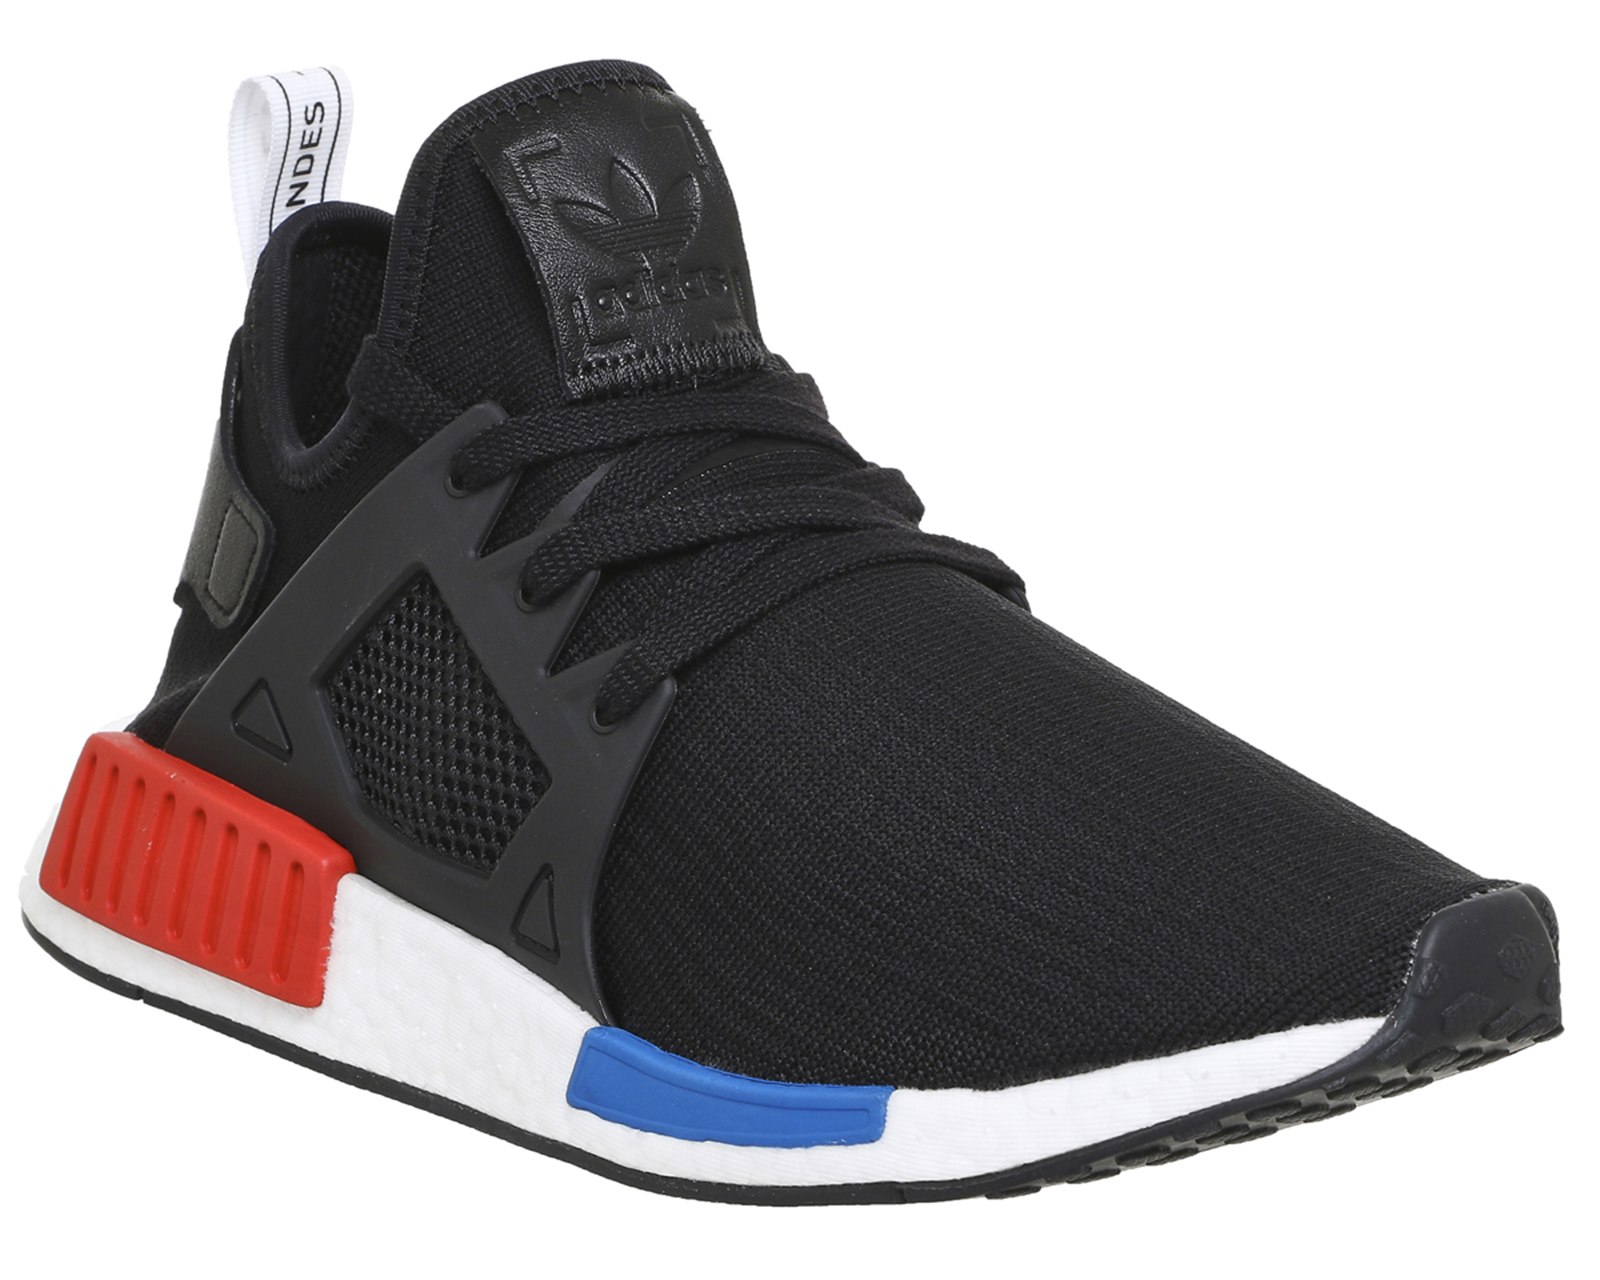 Adidas Nmd Xr1 Blue And Red Hotsell, 50% OFF | www.dalmar.it